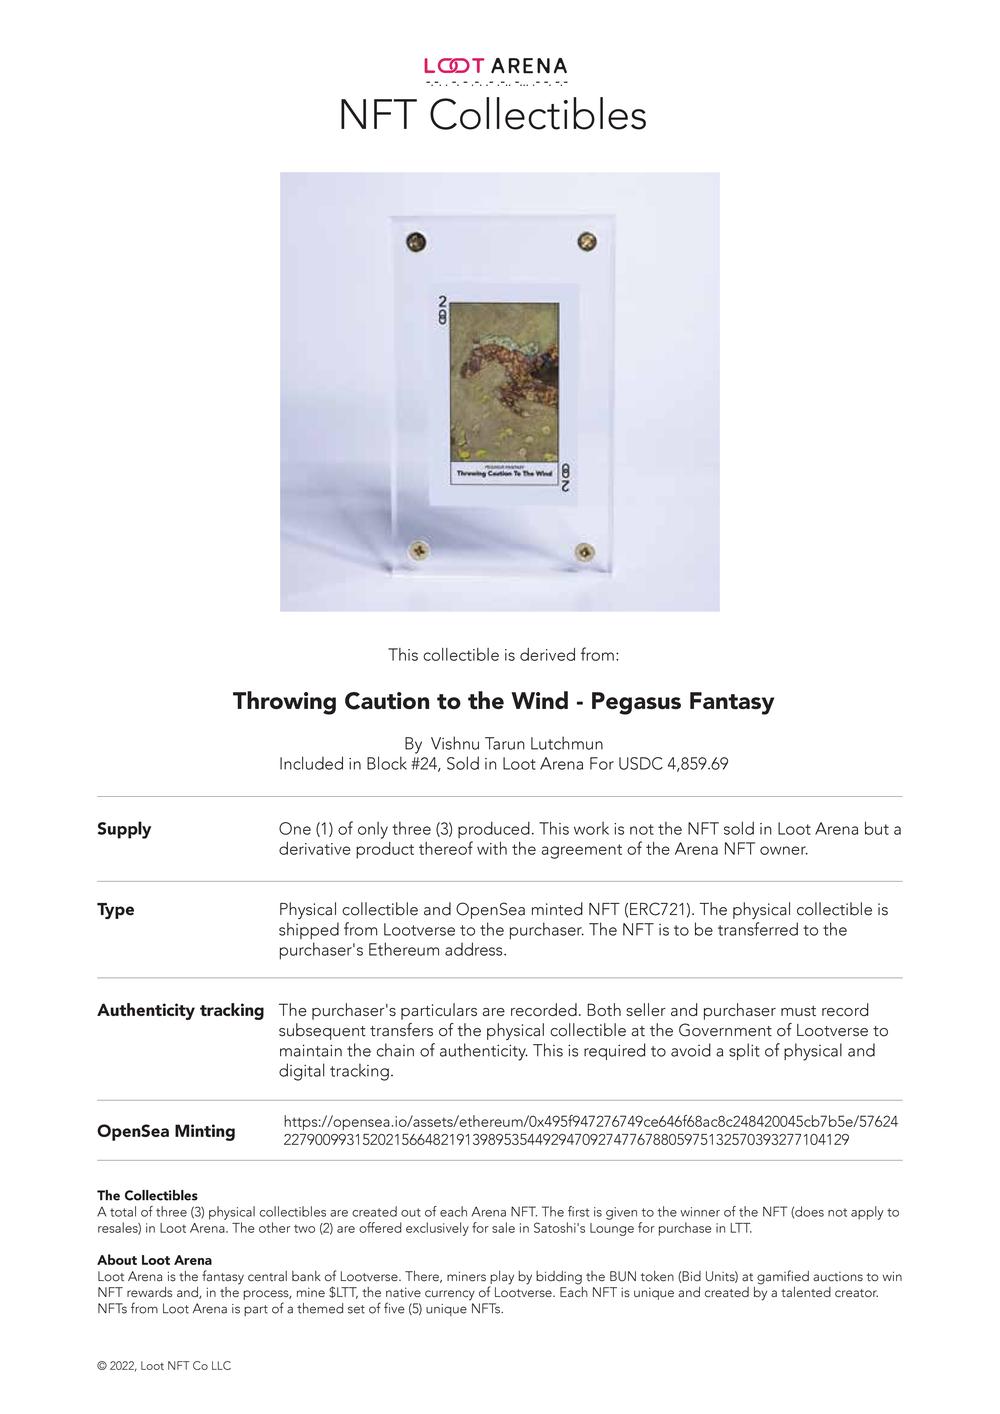 Throwing Caution to the Wind_#1 Collectible_Contract.pdf